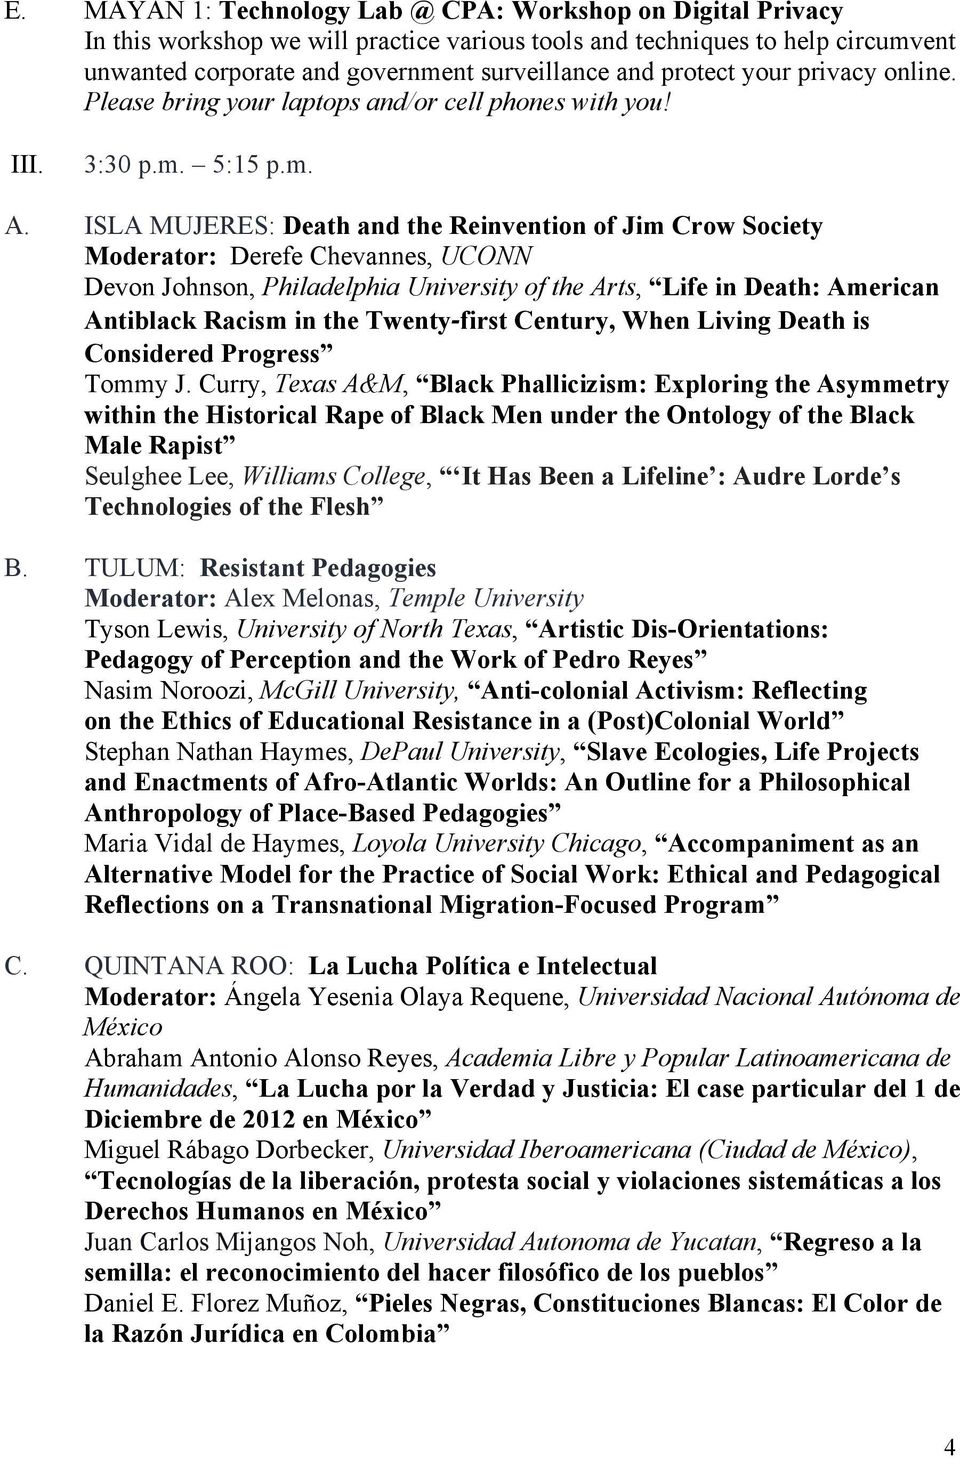 ISLA MUJERES: Death and the Reinvention of Jim Crow Society Moderator: Derefe Chevannes, UCONN Devon Johnson, Philadelphia University of the Arts, Life in Death: American Antiblack Racism in the